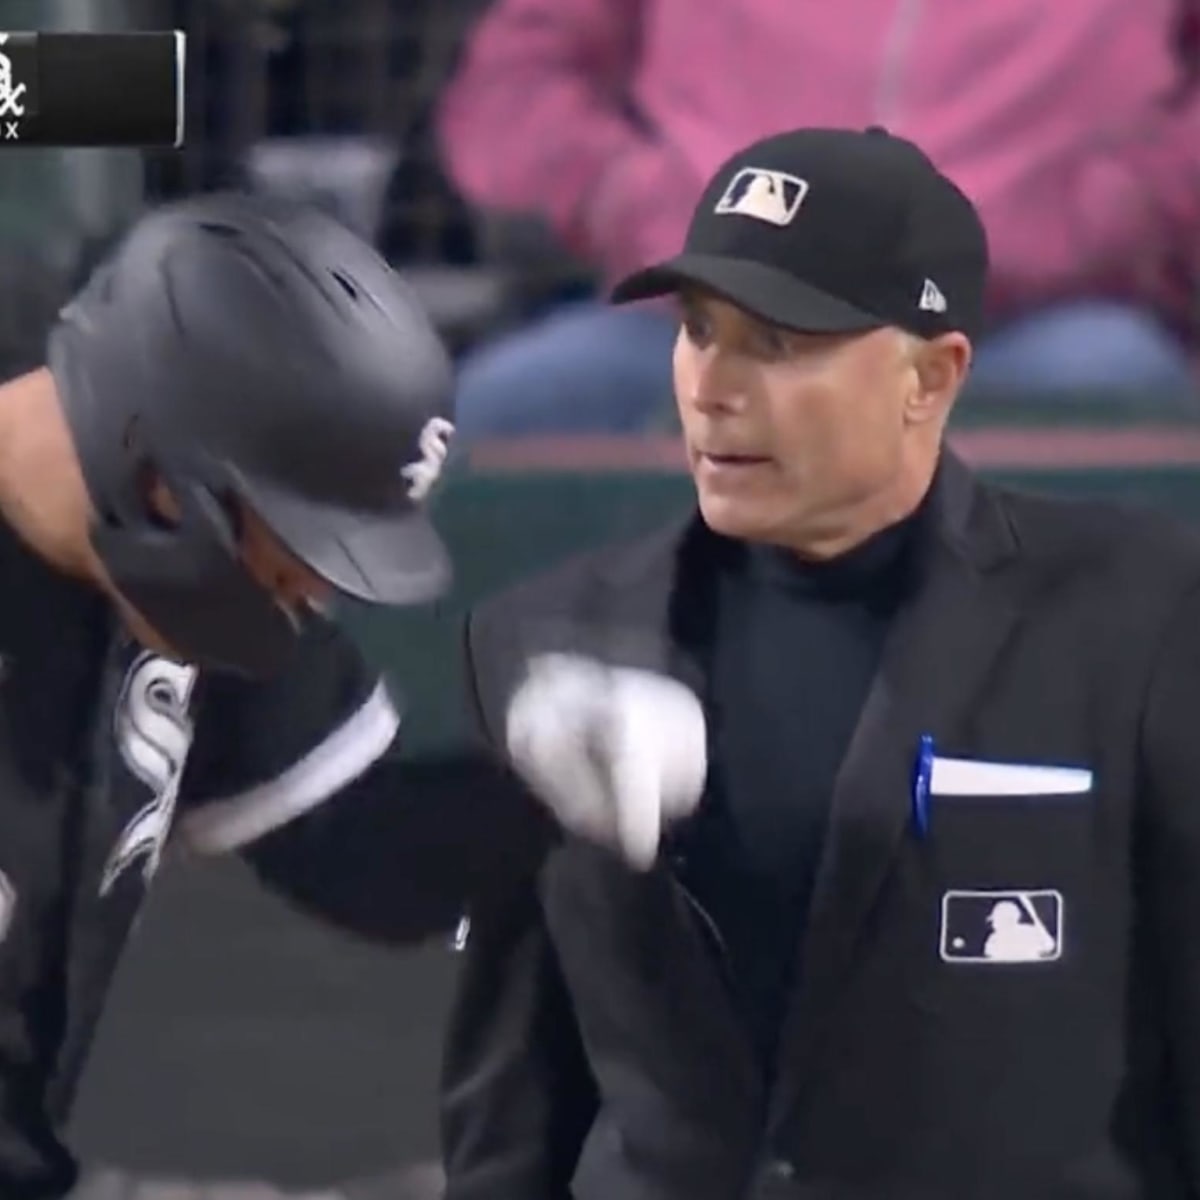 MLB Fans Crushed an Ump for Ejecting White Sox Batter After